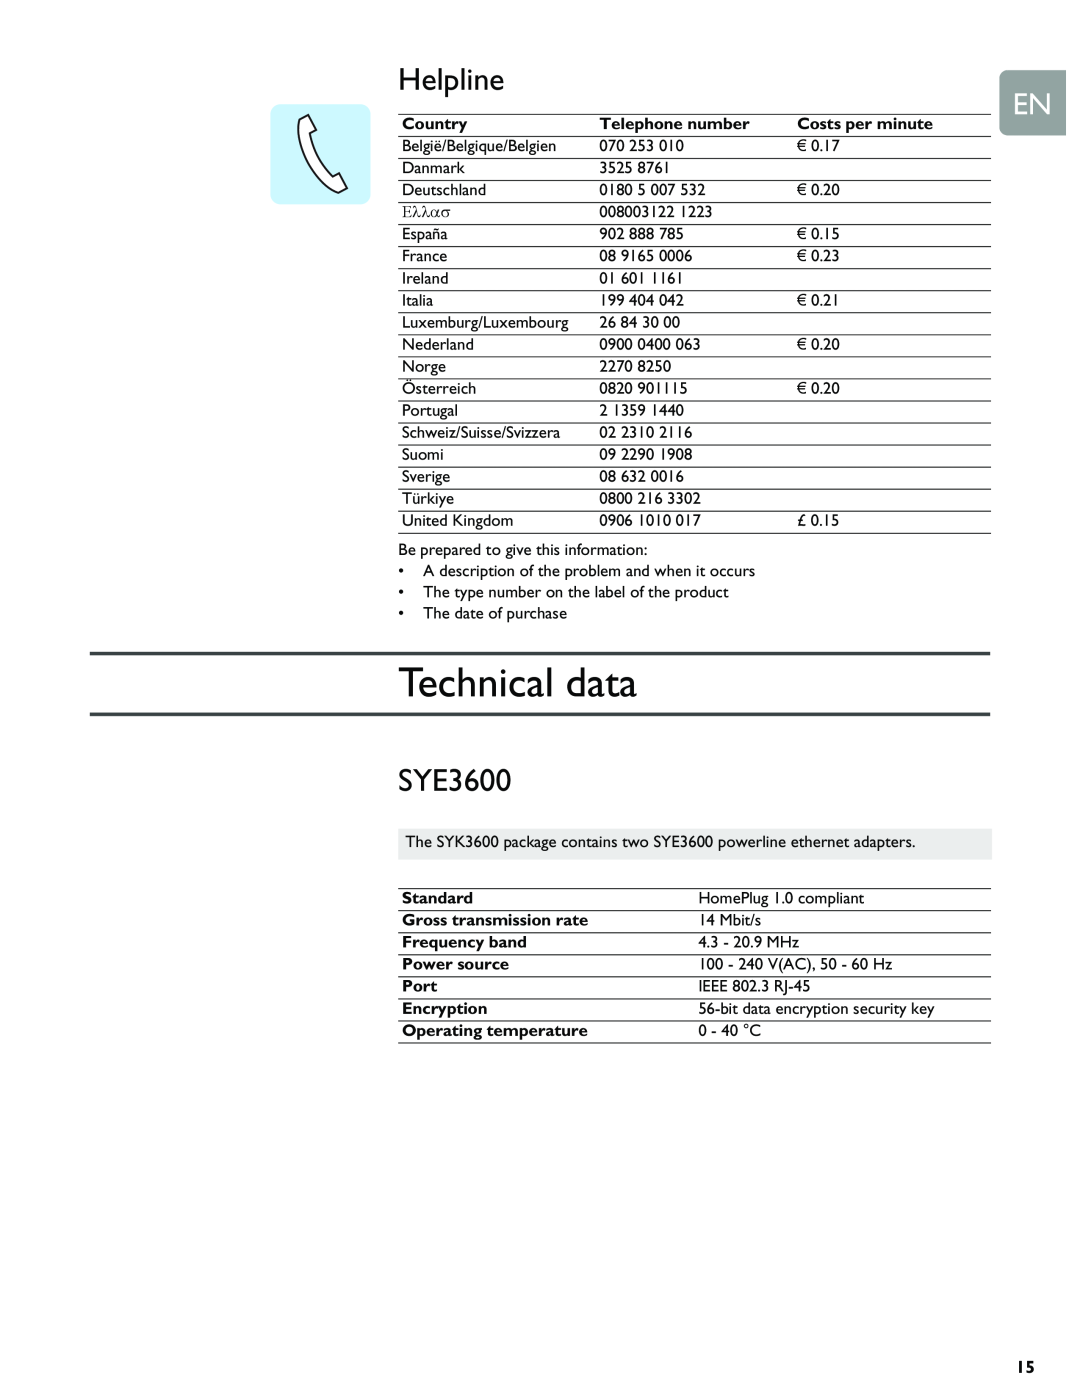 Philips SYE5600 Technical data, Helpline, SYE3600, Country, Telephone number, Costs per minute, Standard, Frequency band 